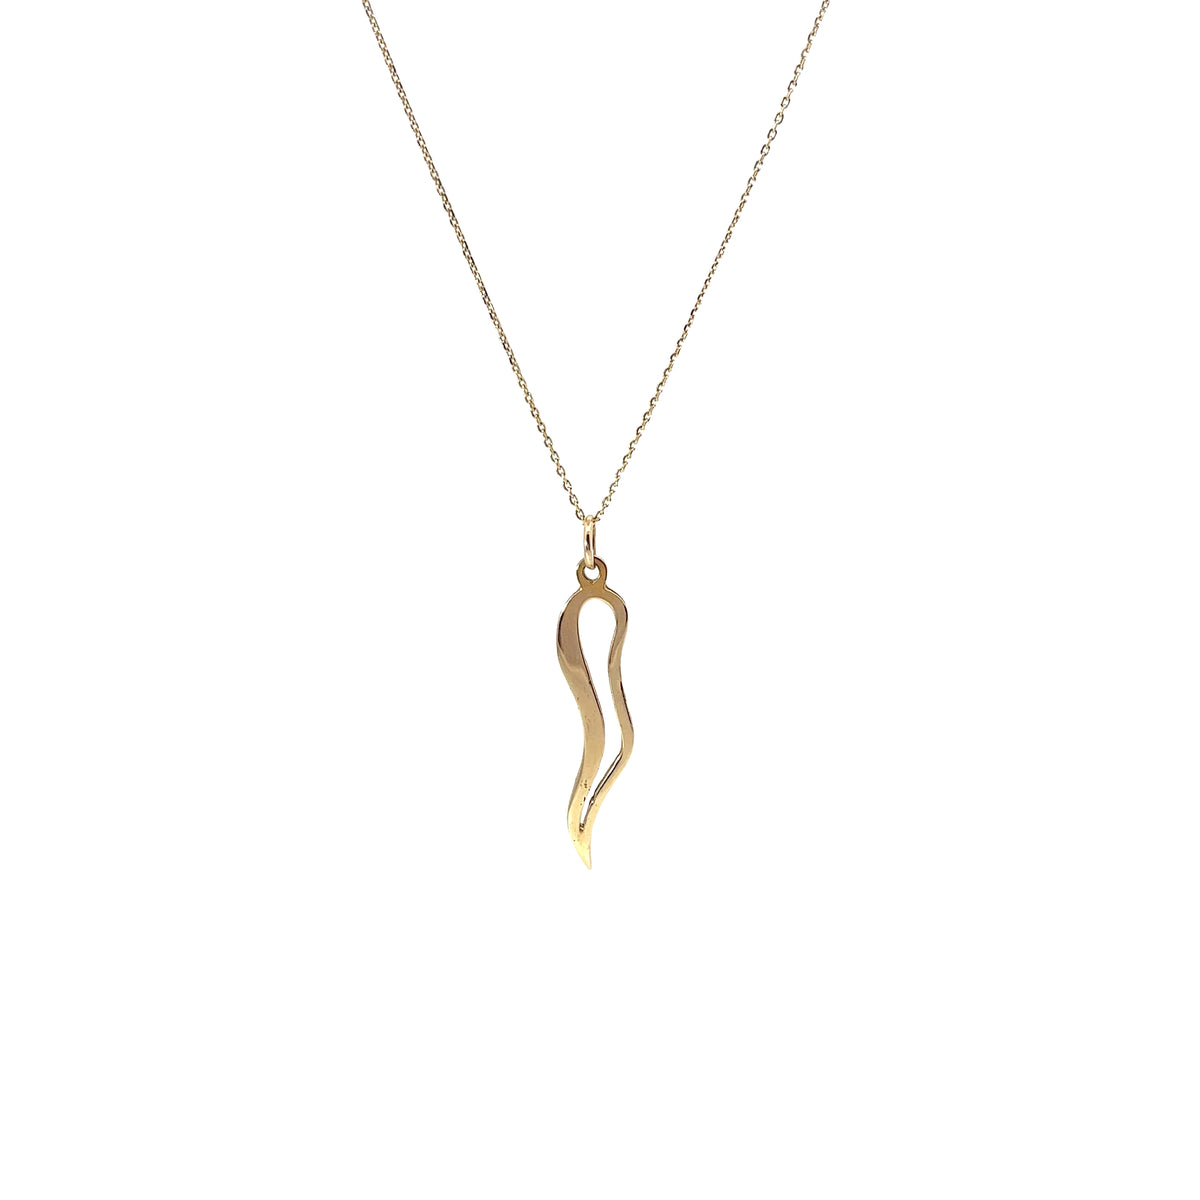 Mens 14k yellow gold Italian Horn Necklace